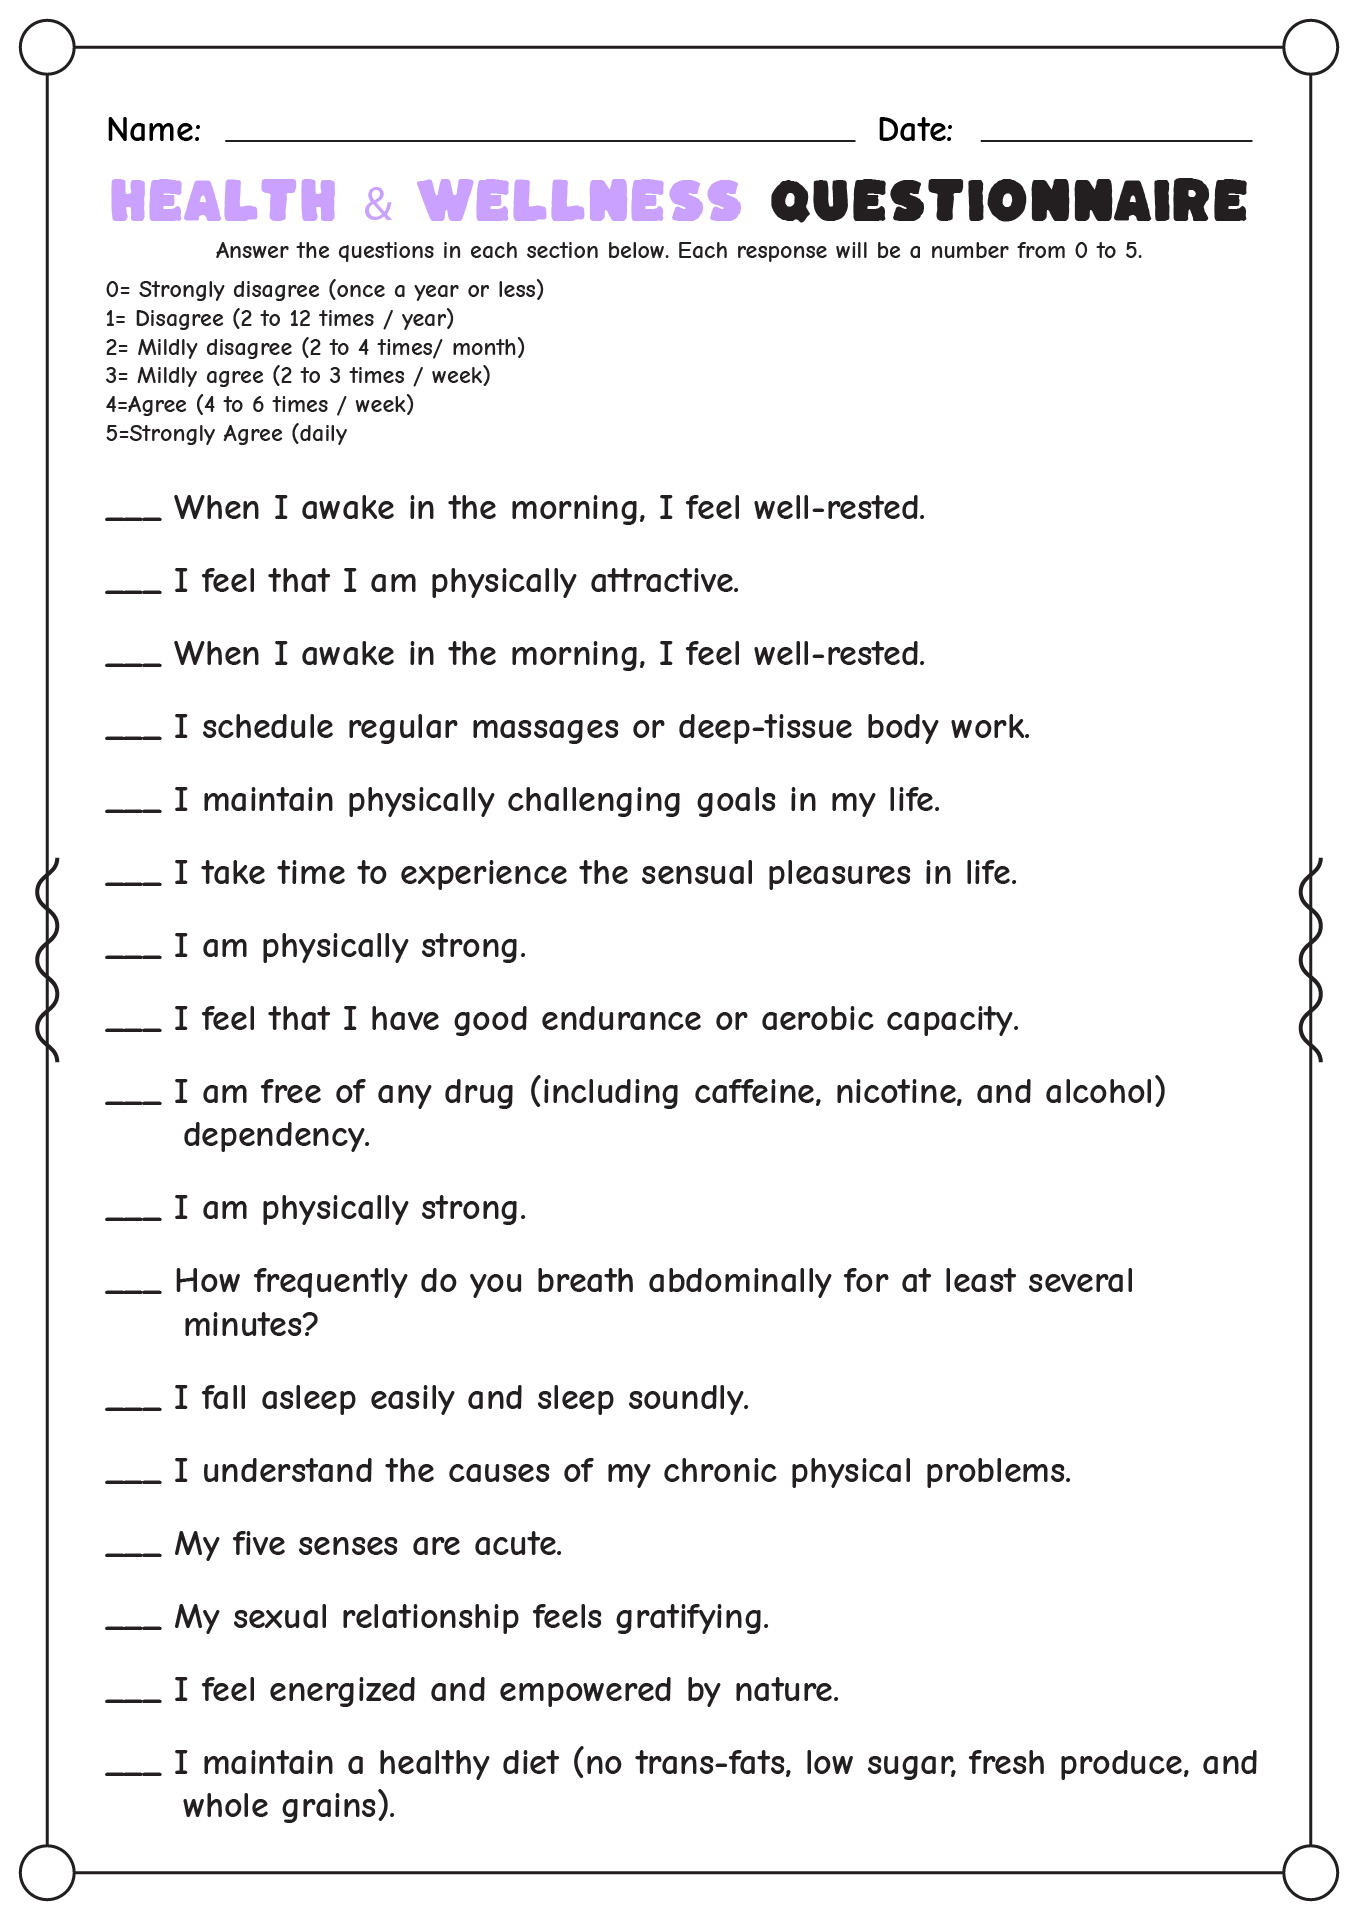 14-best-images-of-8-dimensions-of-wellness-worksheet-math-extra-credit-worksheet-six